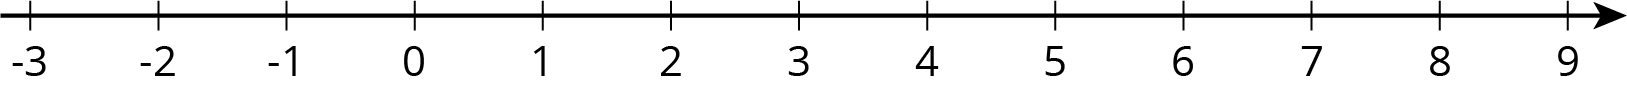 A numbre line that shows the integers from negative 3 to 9